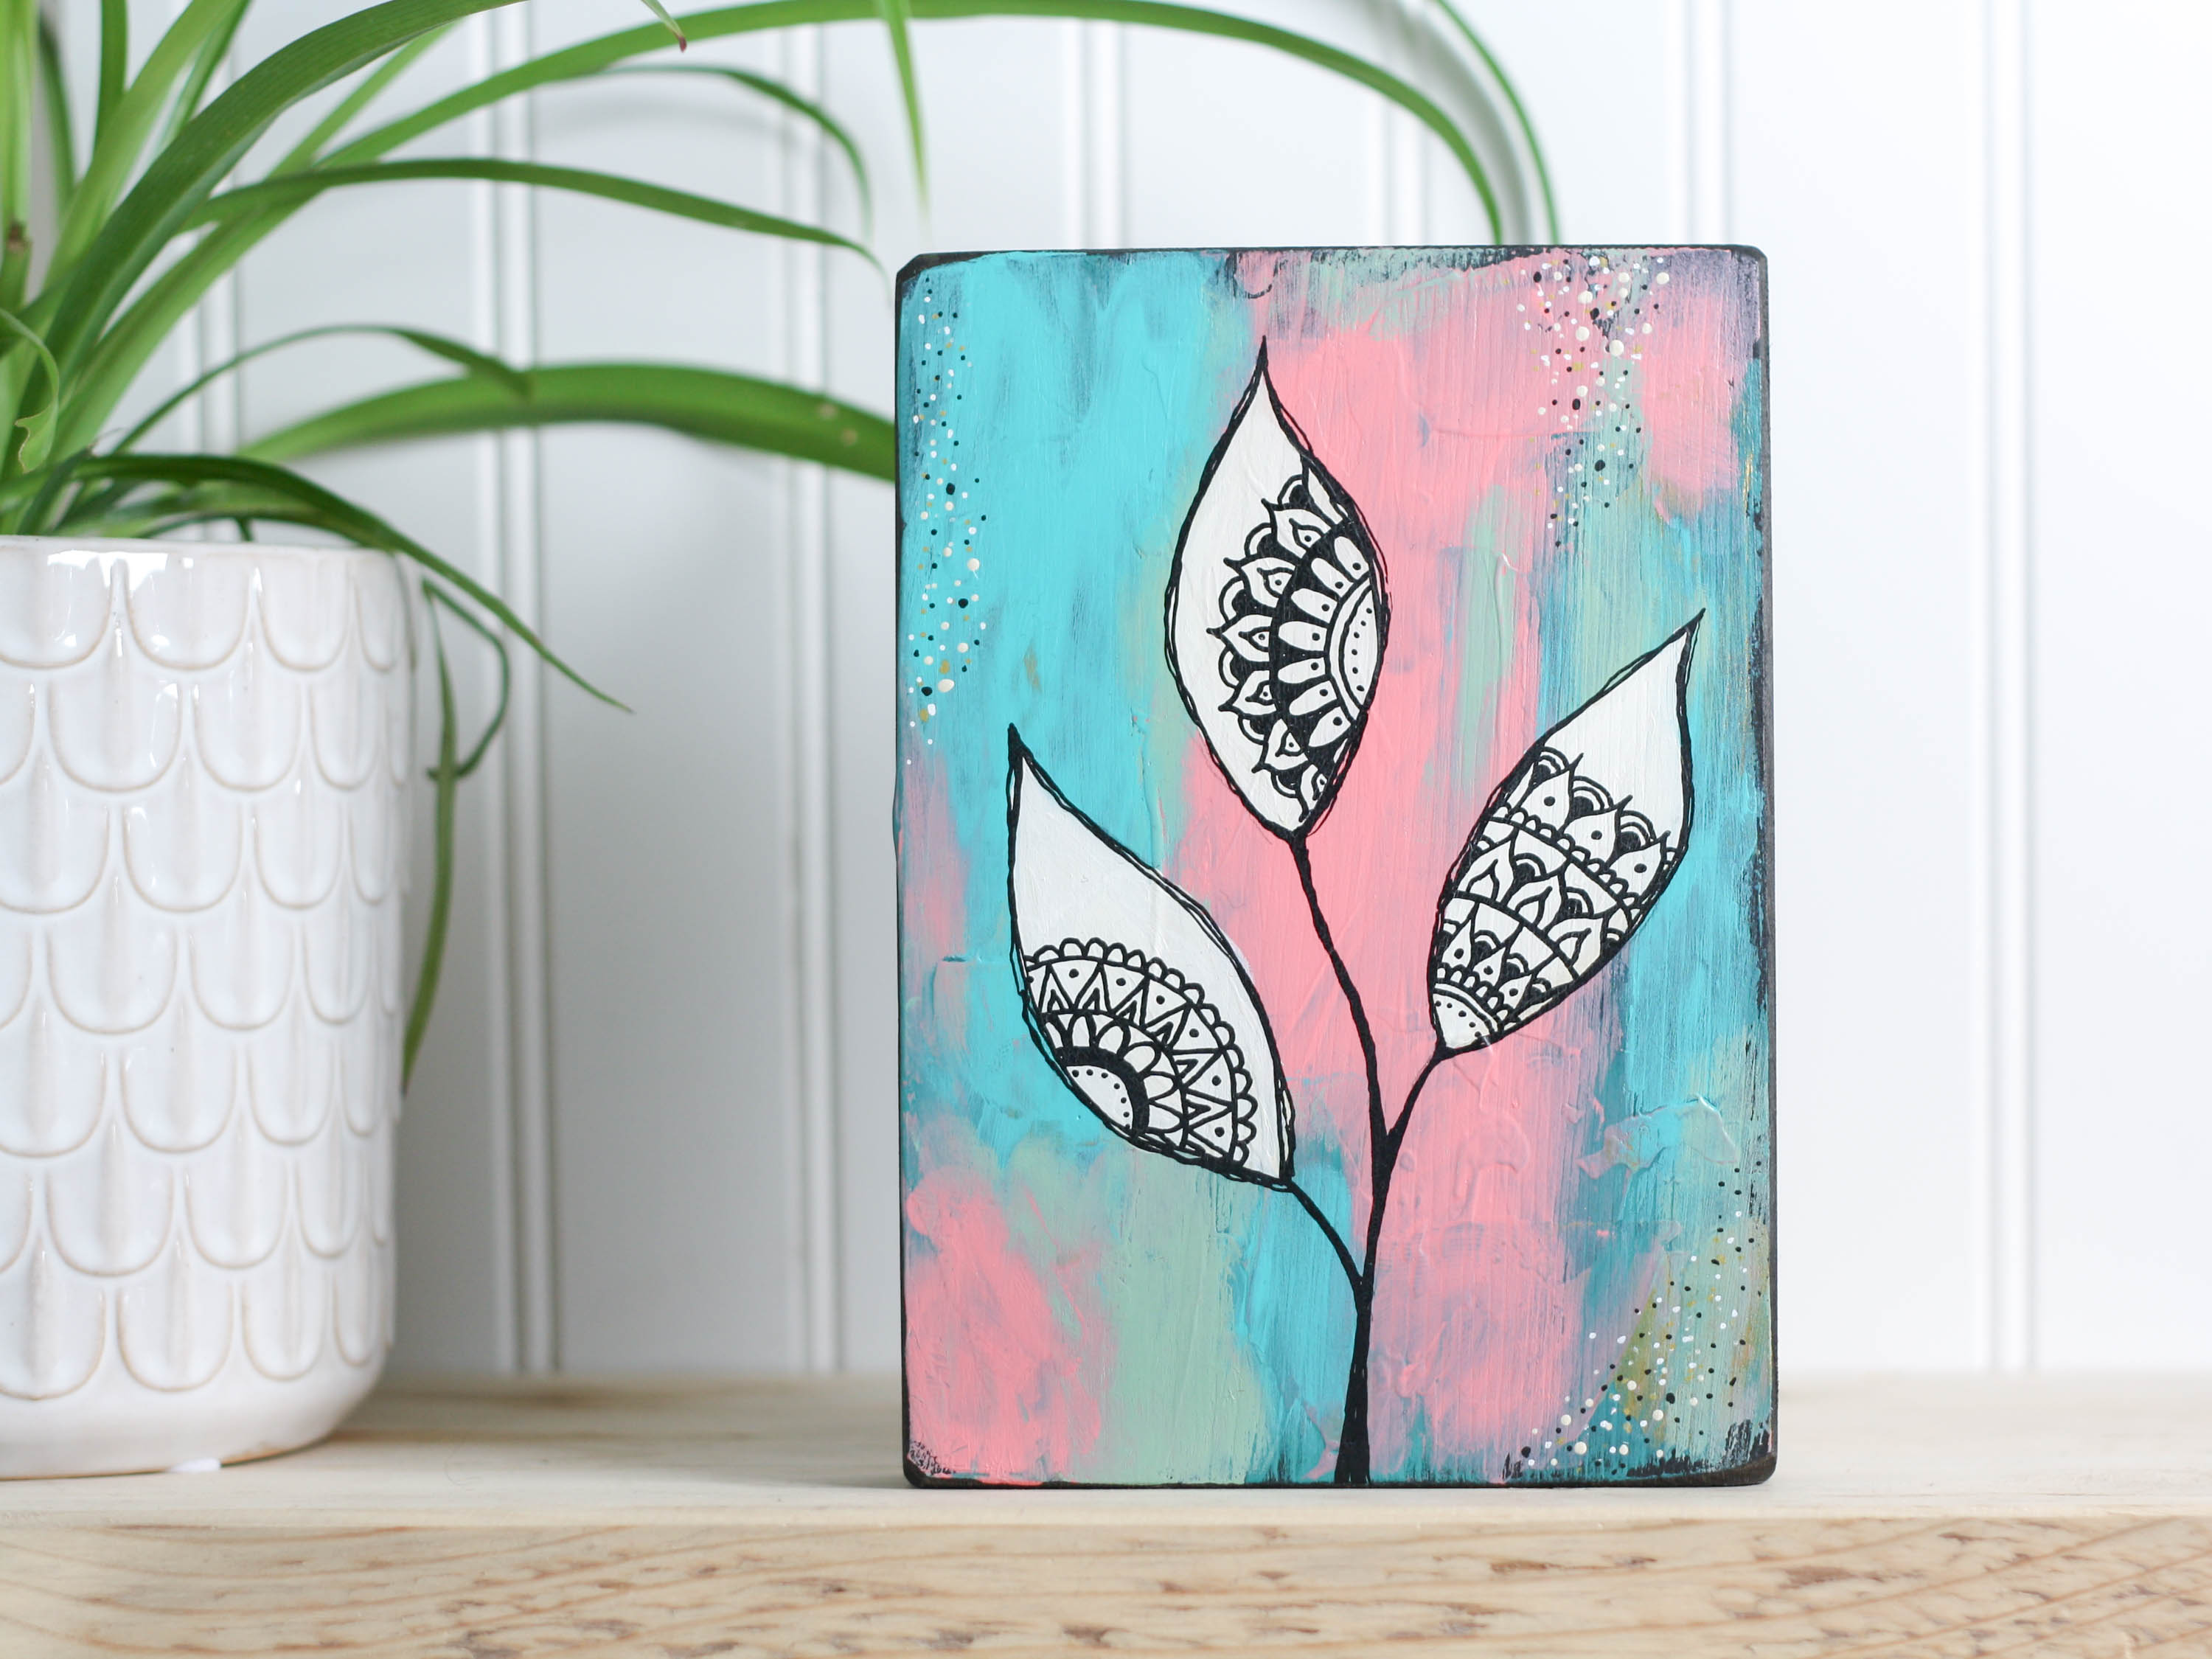 Original mixed media art on a wood block, with a background of teal, peach and dusty light green, with white leaves and mandala inspired shapes inside the leaves.